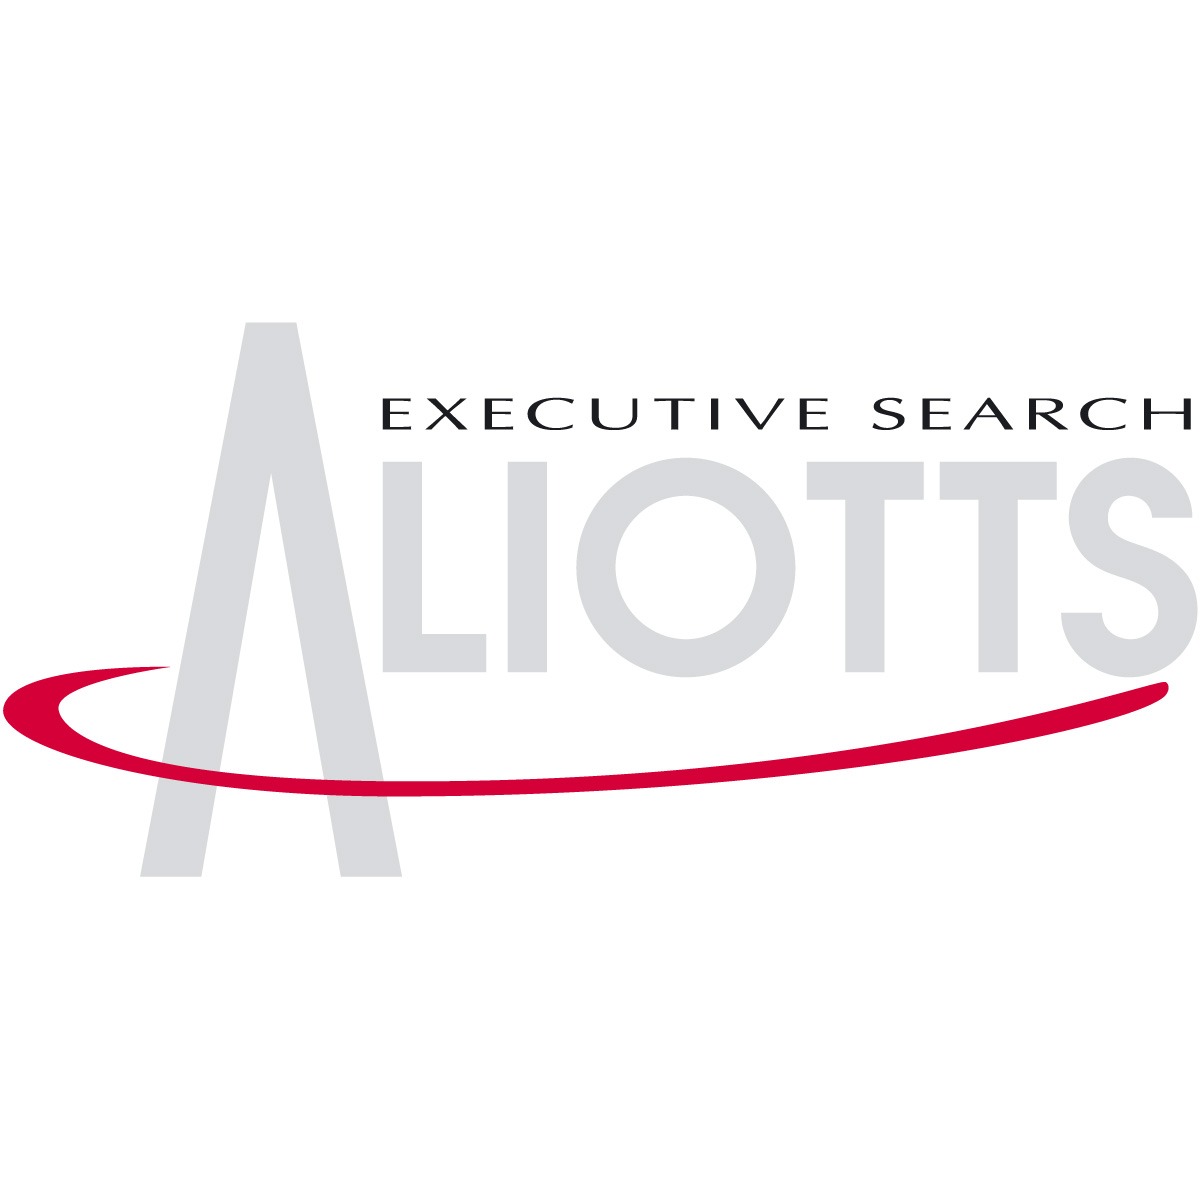 Aliotts Executive Search